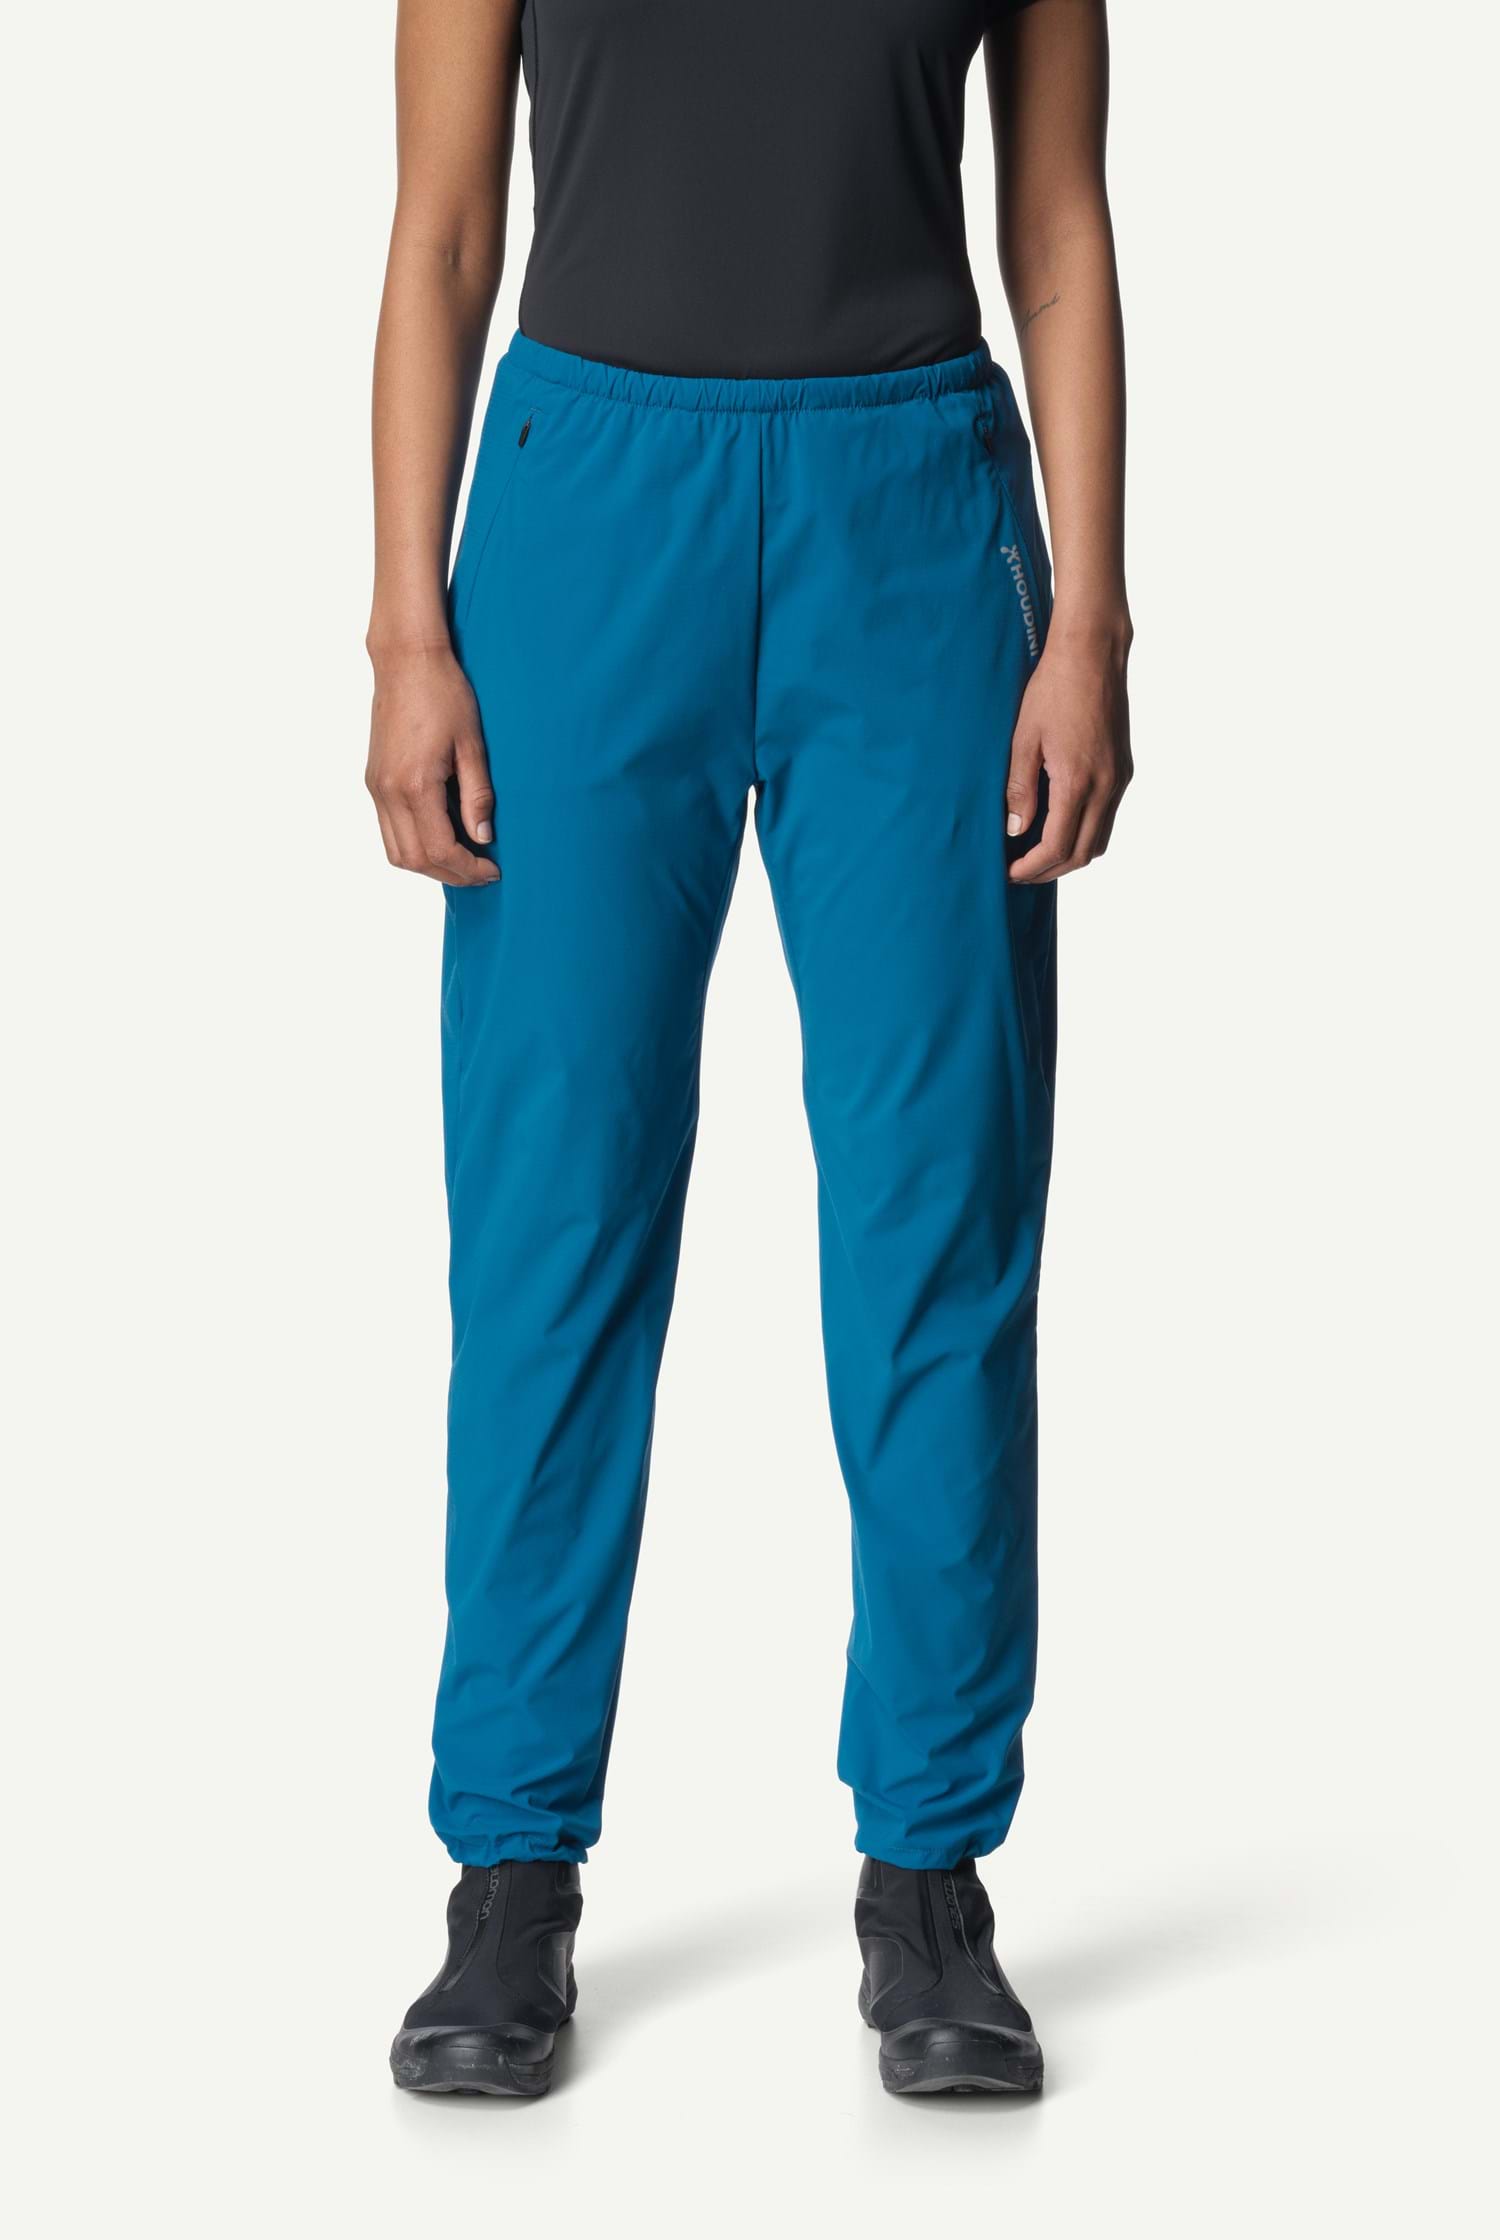 Image of Houdini W's Pace Light Pants, Out Of The Blue, XS